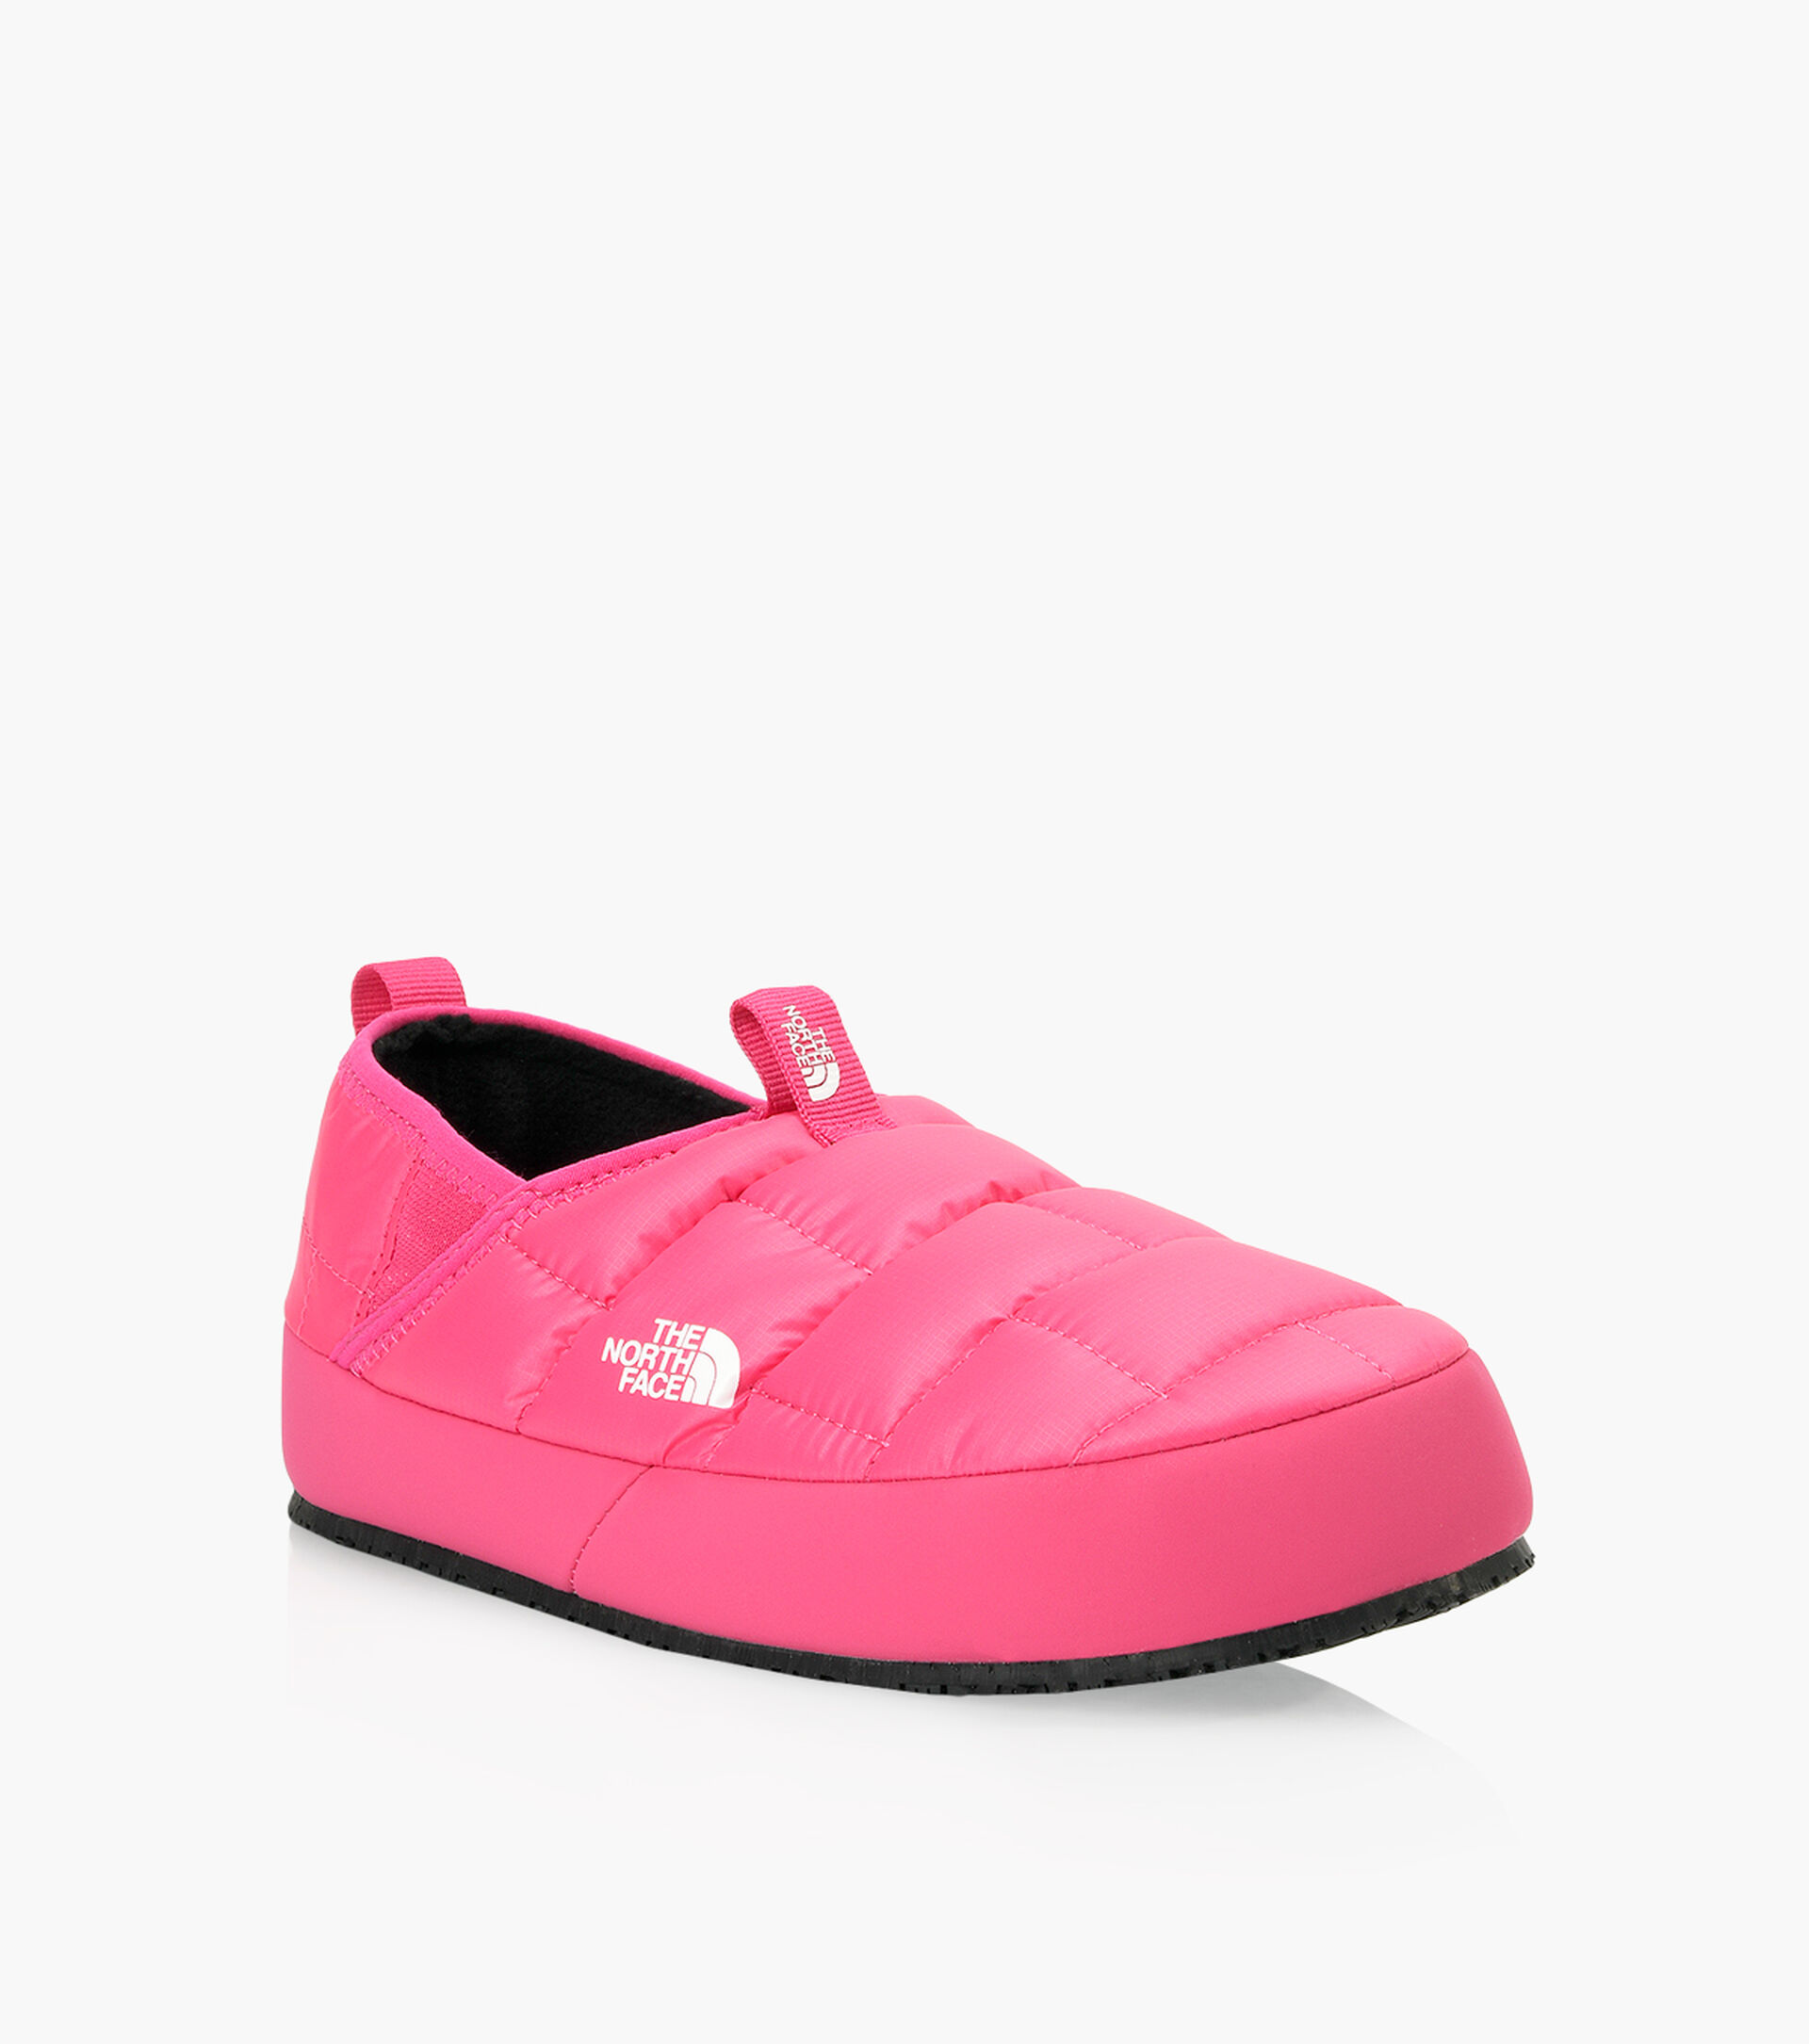 THE NORTH FACE THERMOBALL TRACTION MULE II - Pink | Browns Shoes